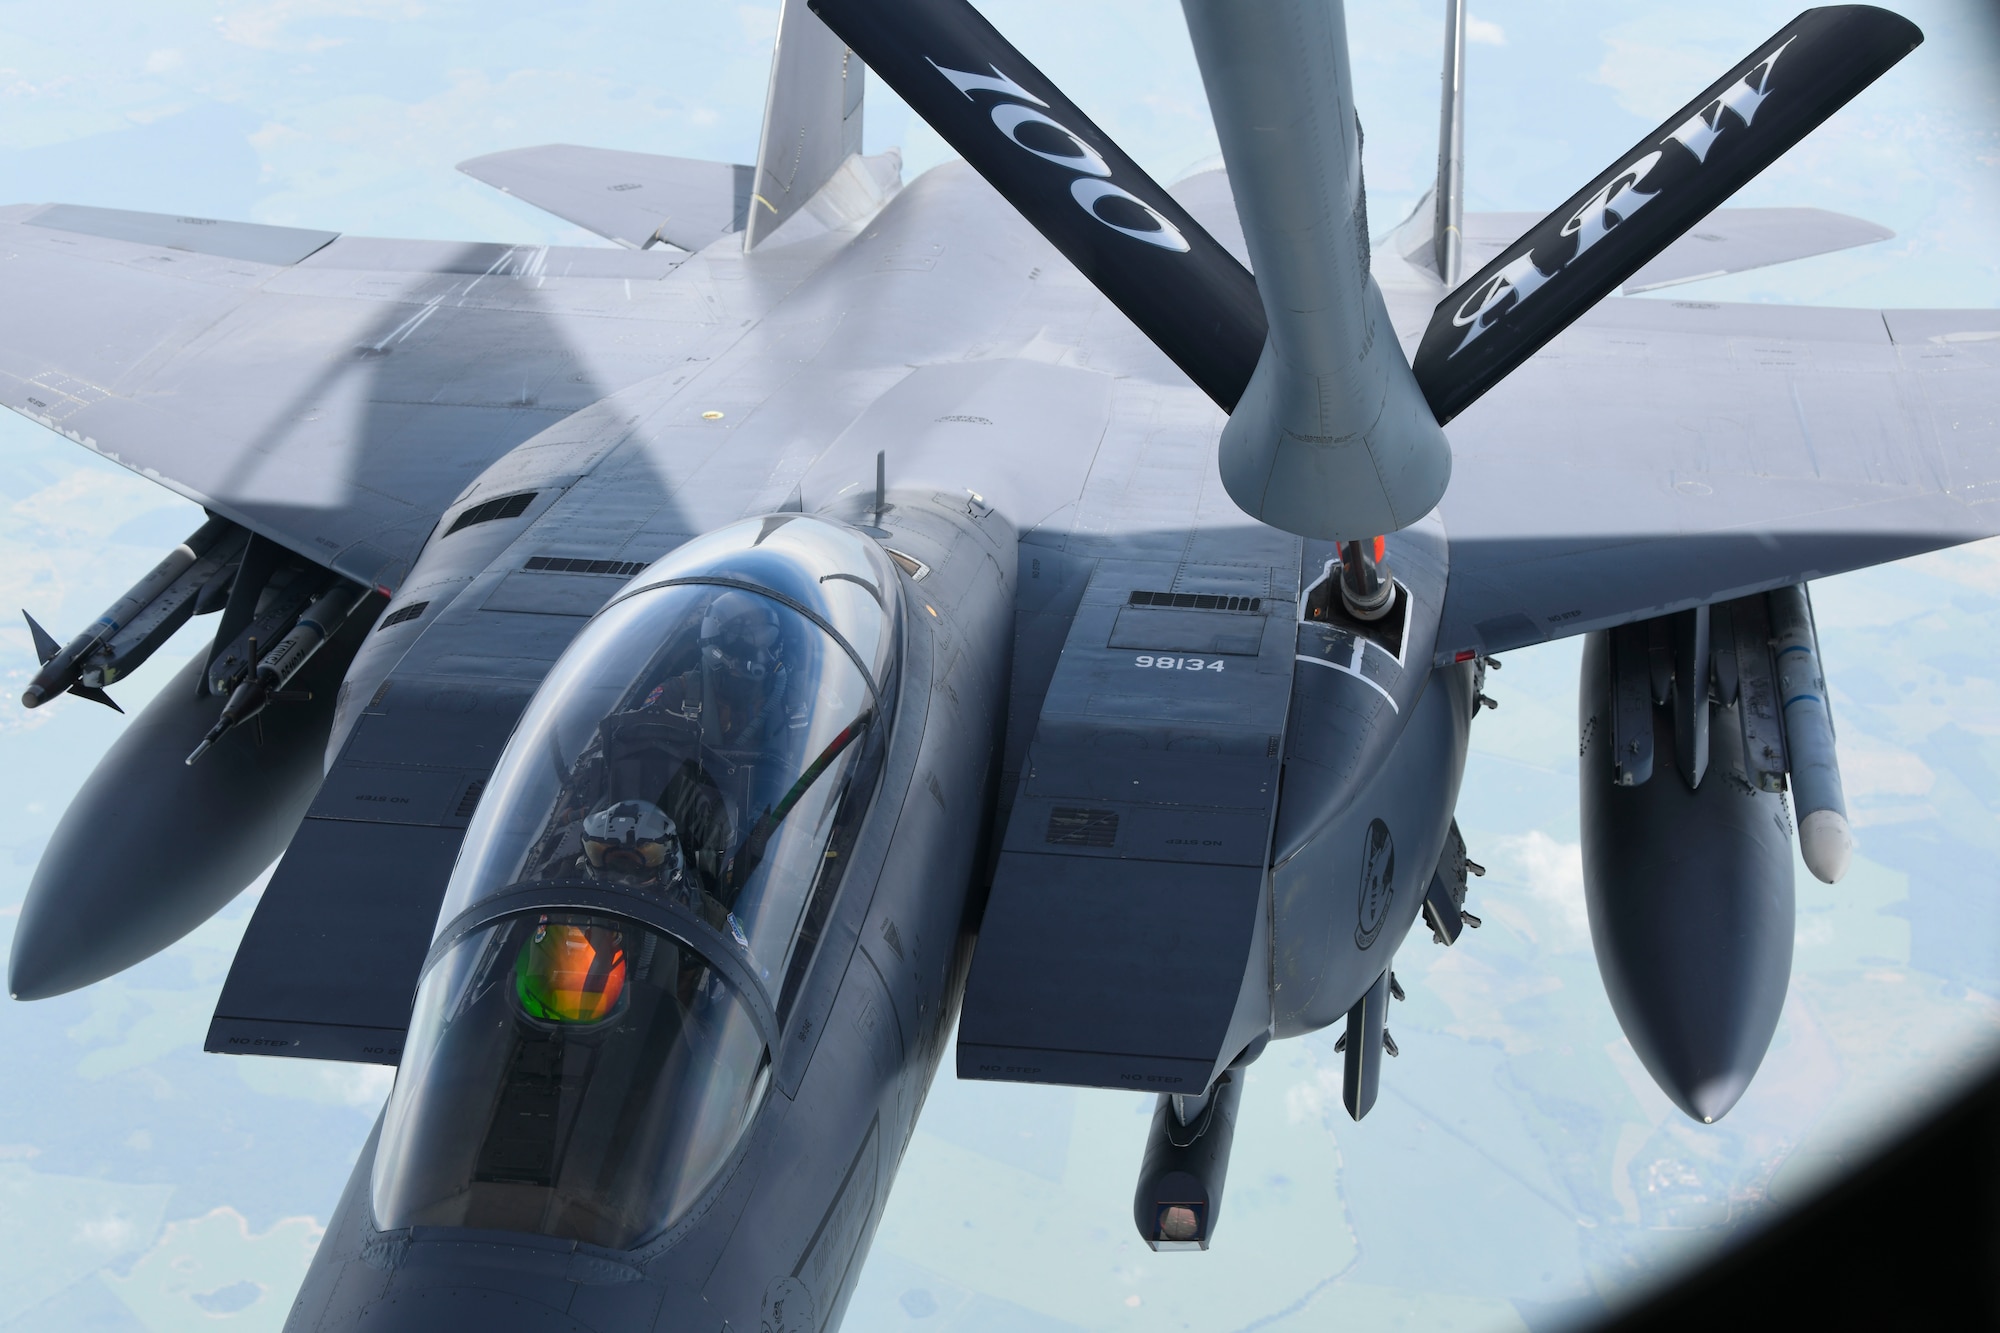 A U.S. Air Force KC-135 Stratotanker refuels an F-15E Strike Eagle assigned to the 492nd Fighter Squadron, RAF Lakenheath, in support of Exercise Baltic Operations, over Germany, June 12, 2019. Exercise Baltic Operations is a U.S. exercise focused on joint interoperability in the Baltic Region, planned and executed this year by the U.S. and NATO. (U.S. Air Force photo by Senior Airman Alexandria Lee)